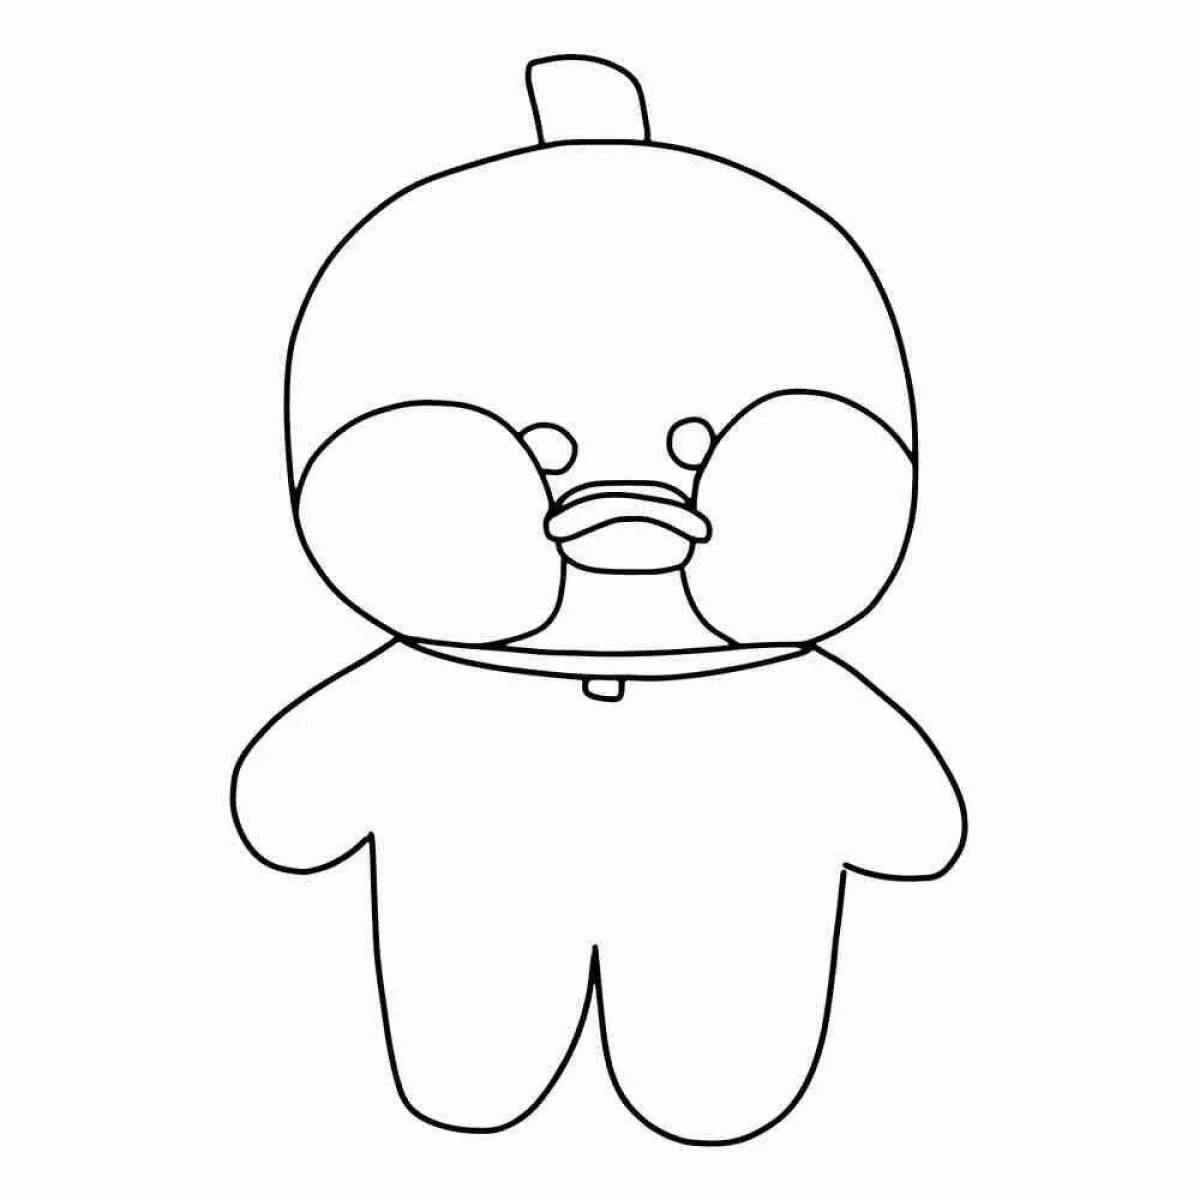 Fancy paper duck coloring page